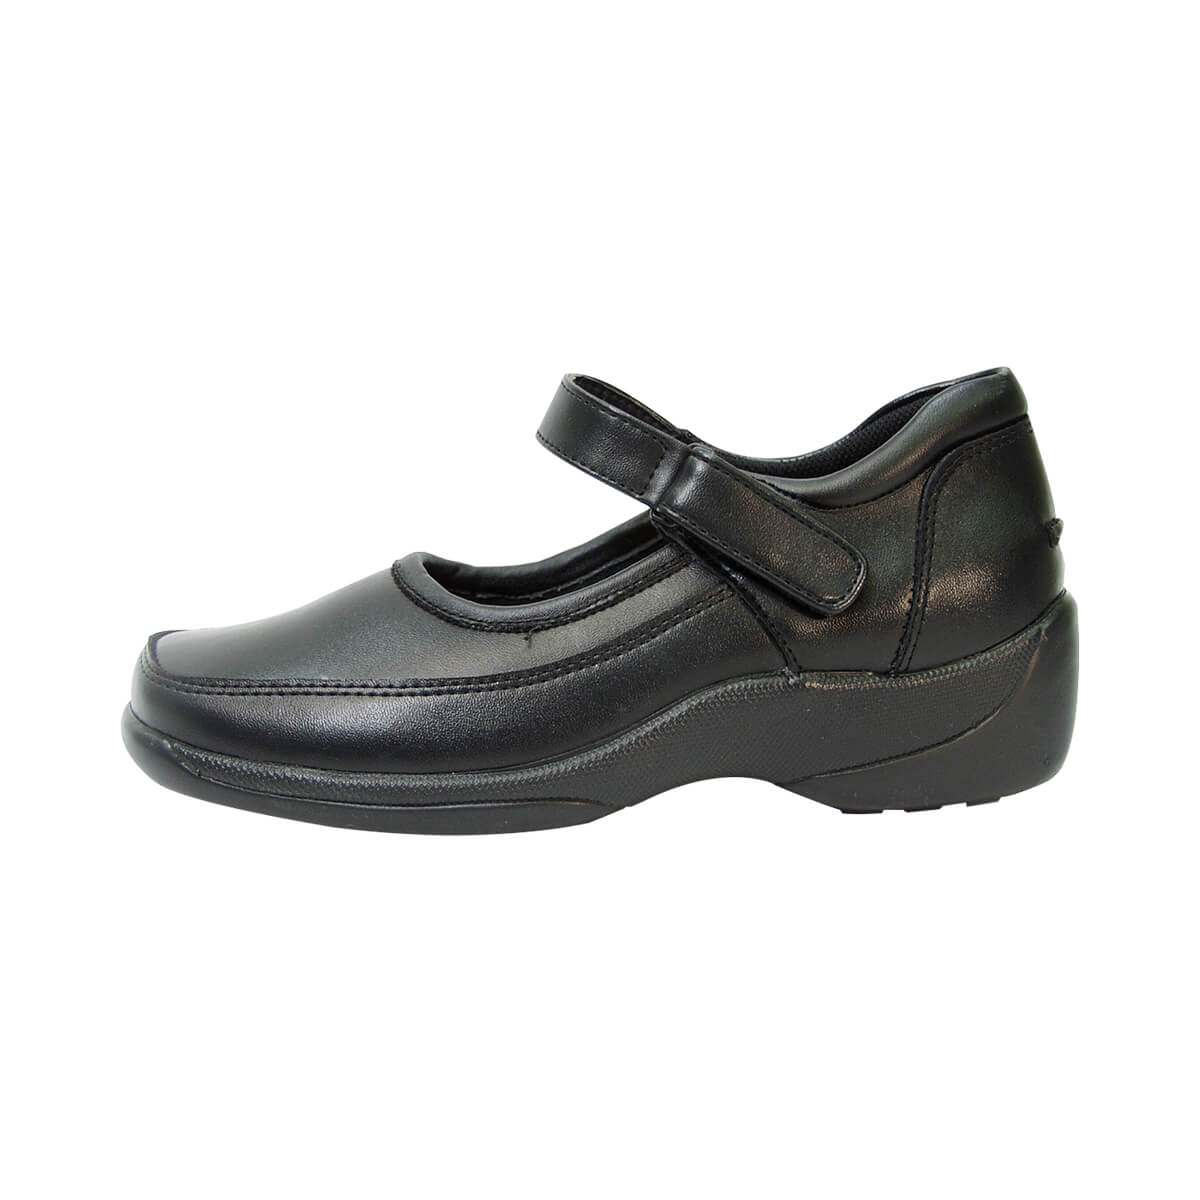 24 HOUR COMFORT Judy Women's Wide Width Leather Shoes